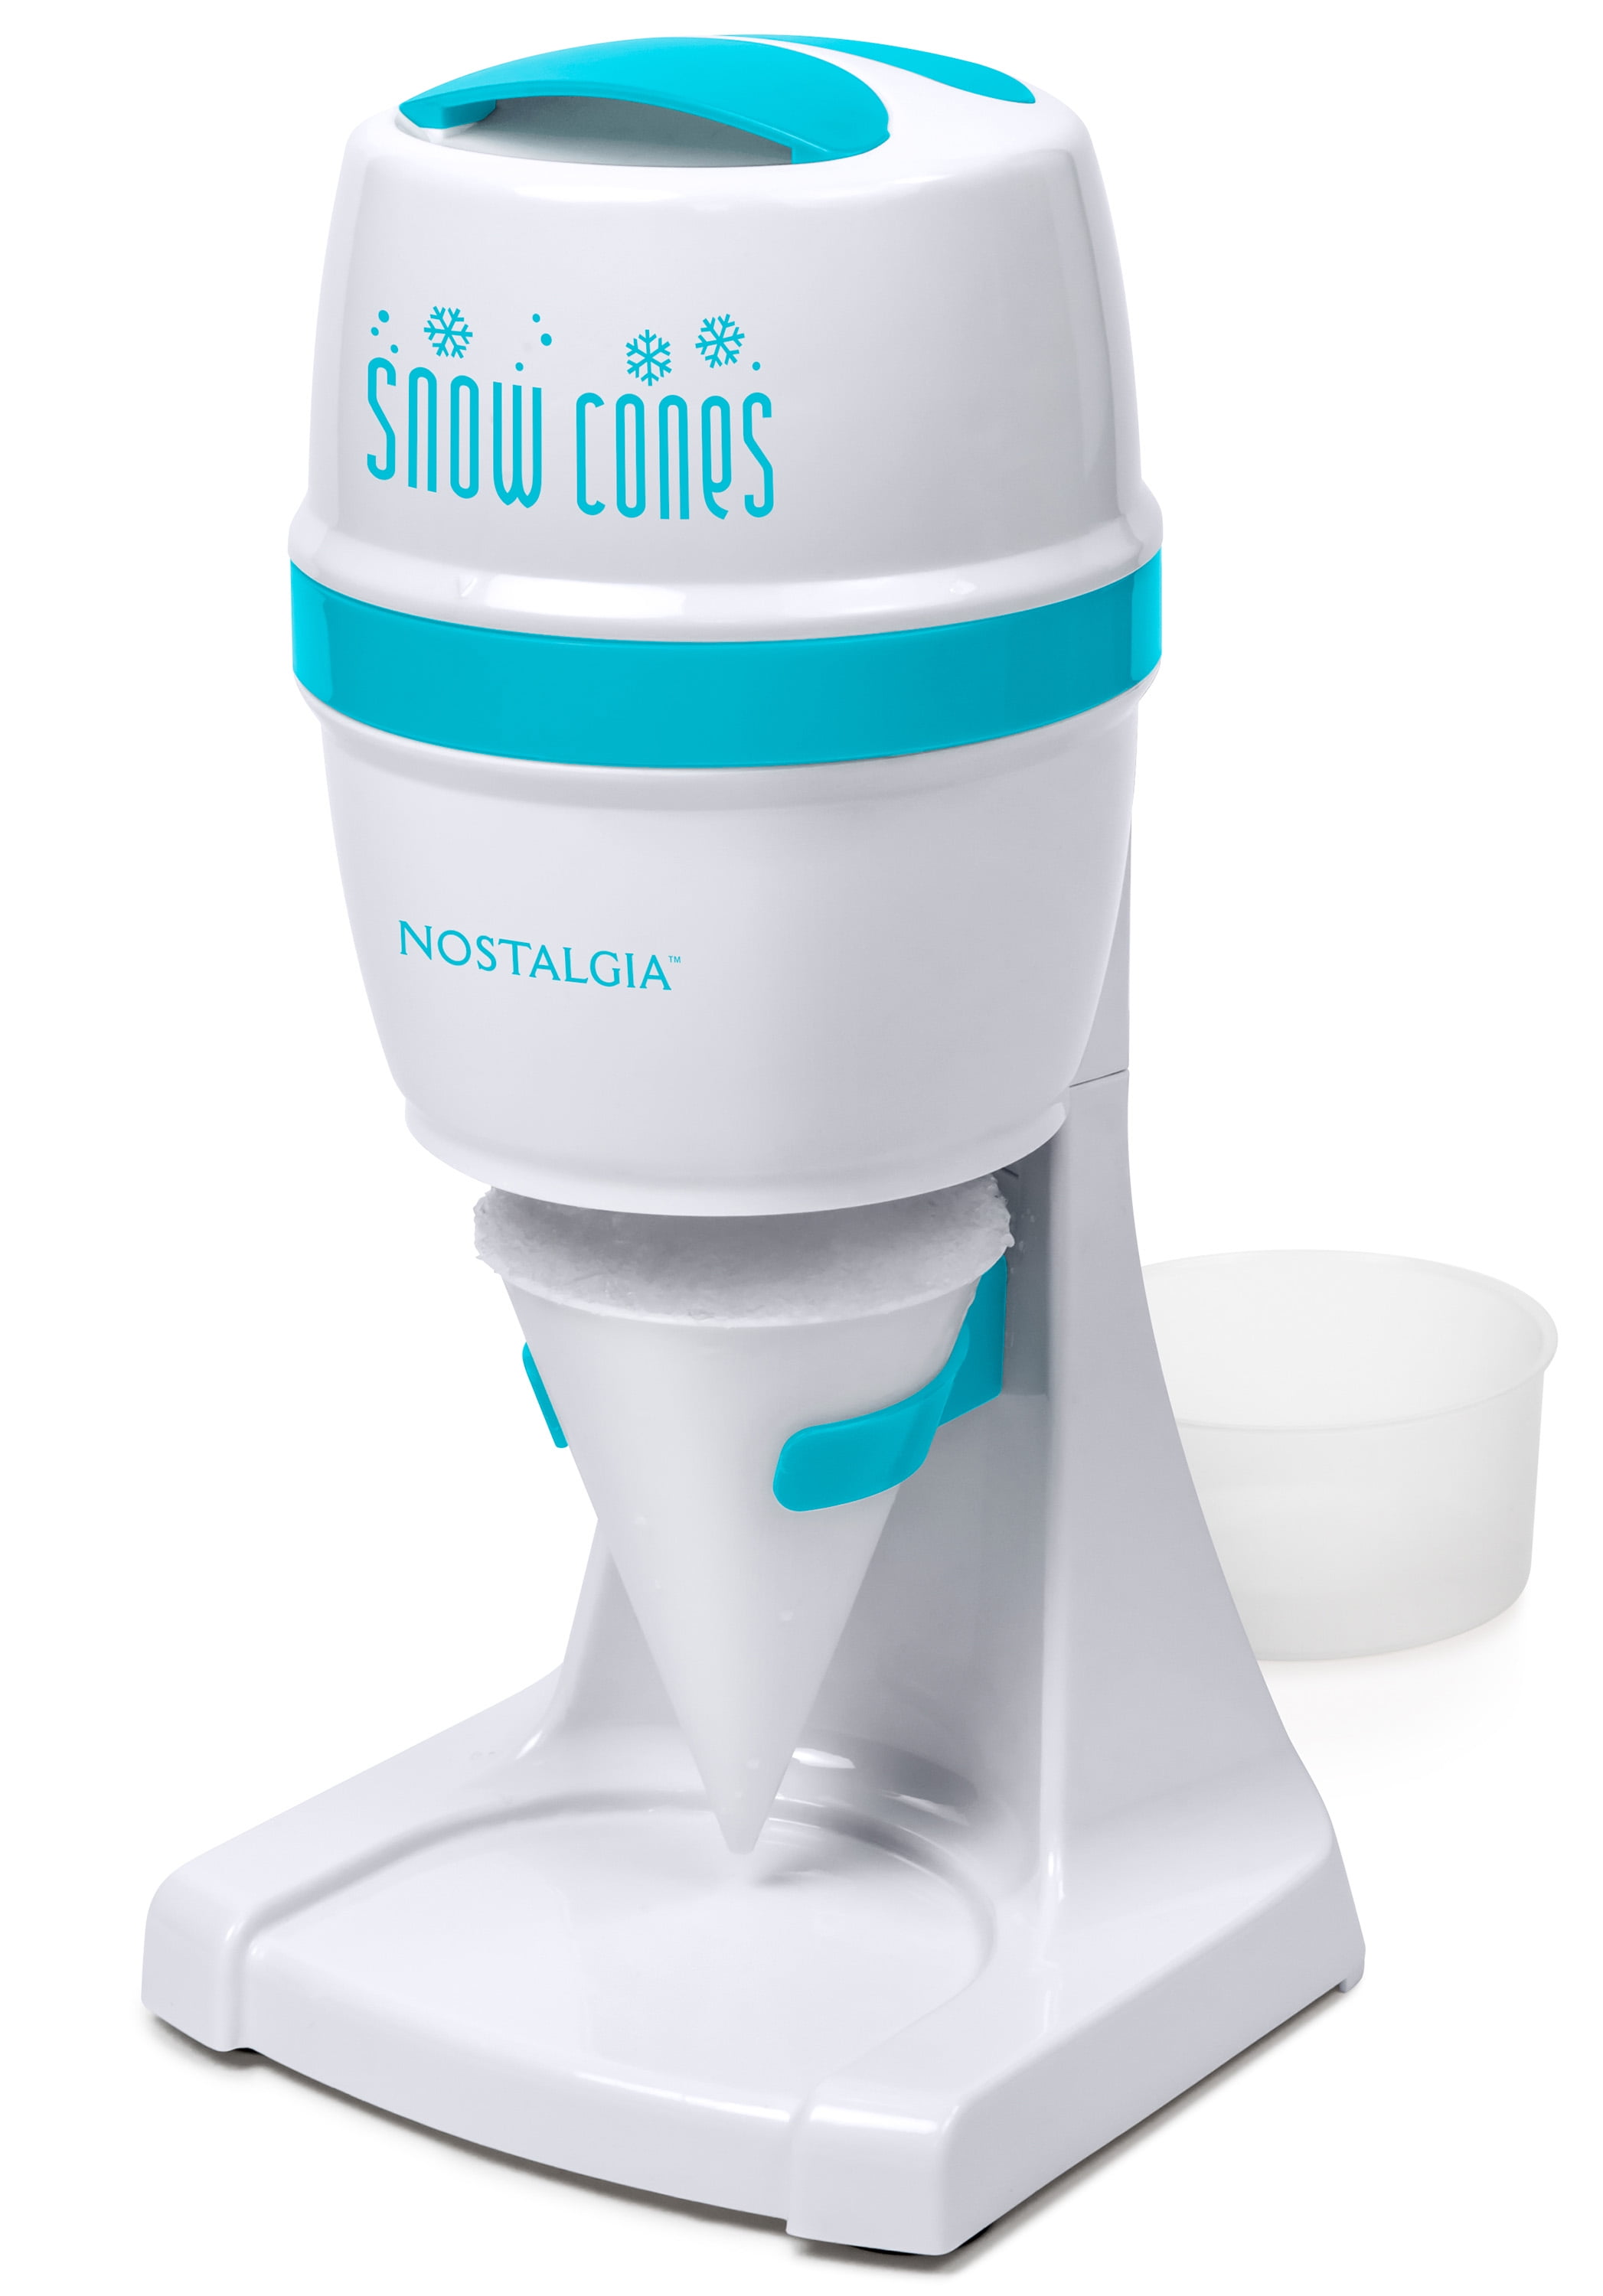 Nostalgia ISM1000 Electric Shaved Ice & Snow Cone Maker 